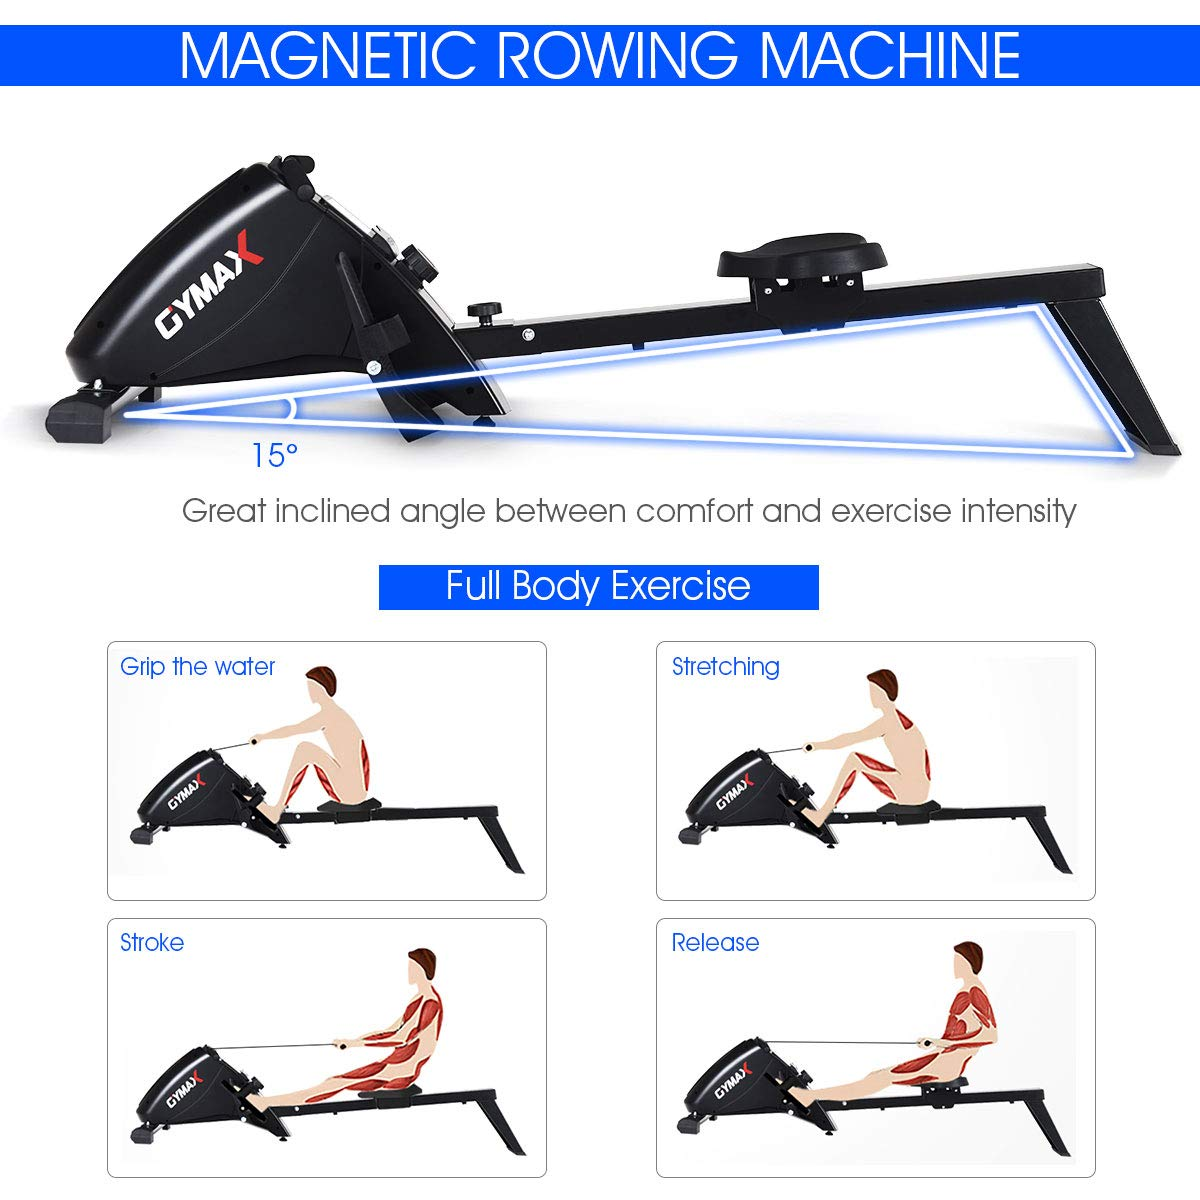 Goplus Magnetic Rowing Machine, Foldable Rower with 10-Level Tension Resistance System (Black)